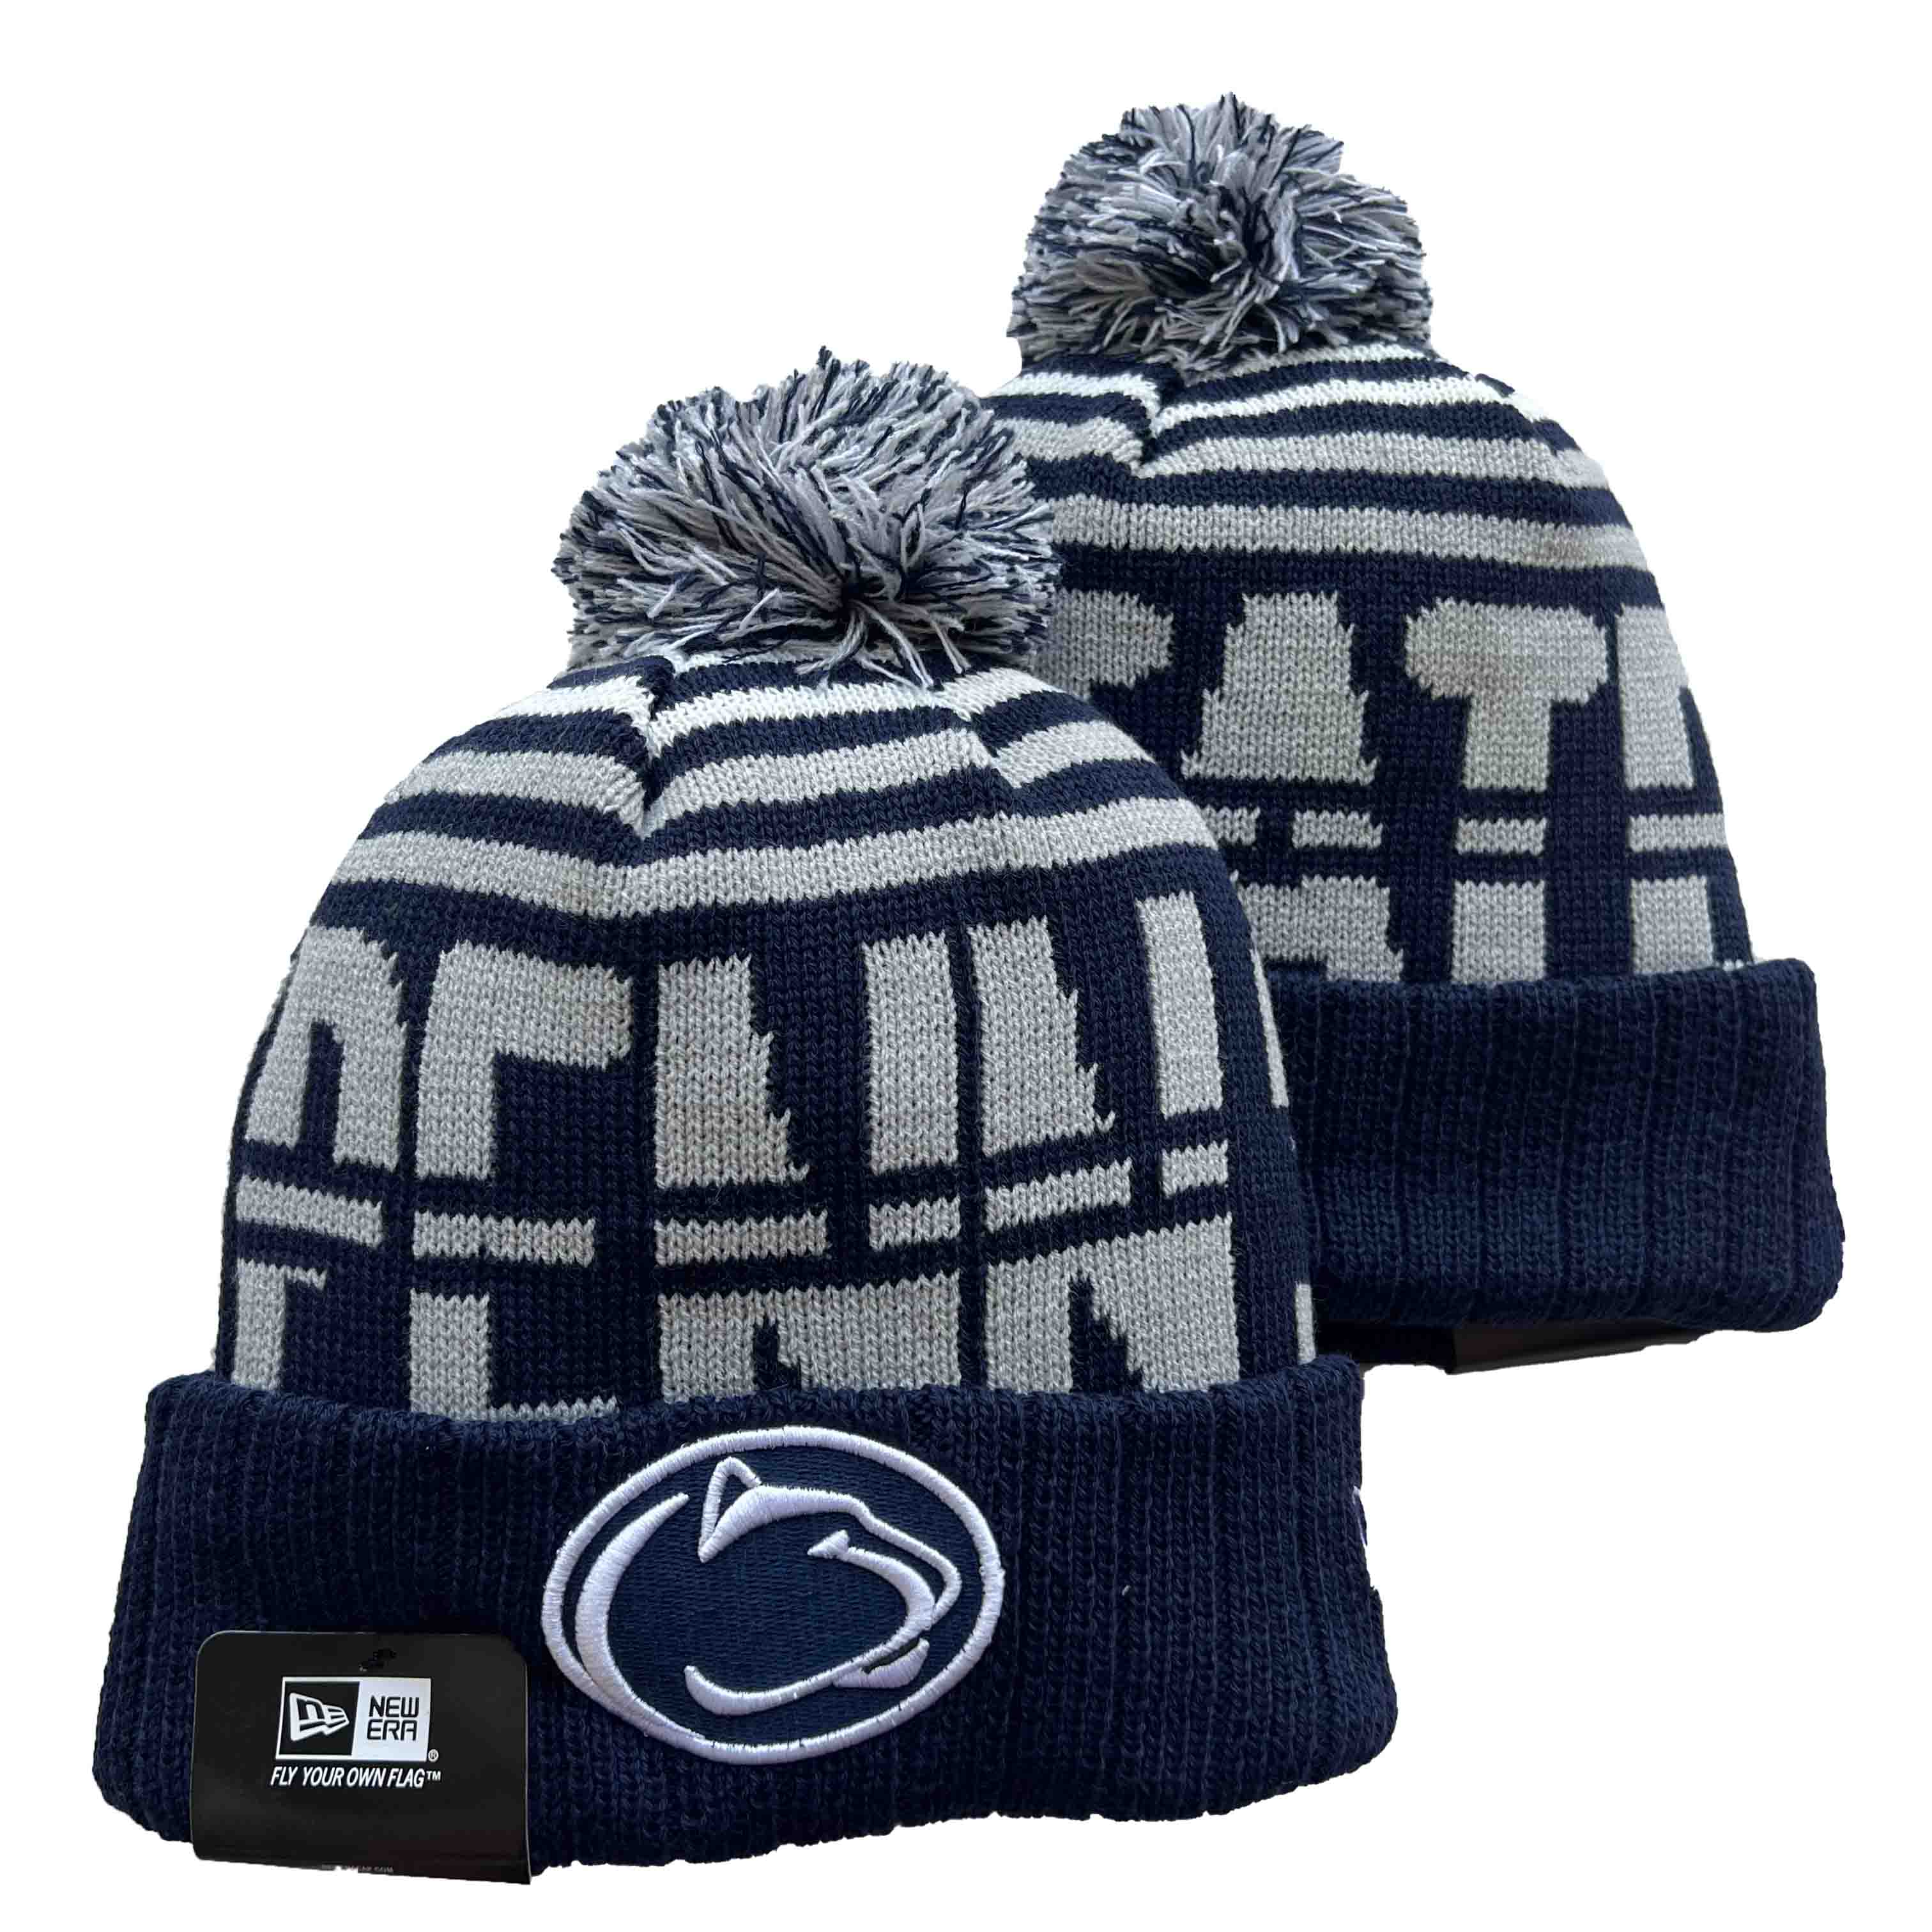 NCAA Penn State Nittany Lions Beanies Knit Hats-YD406